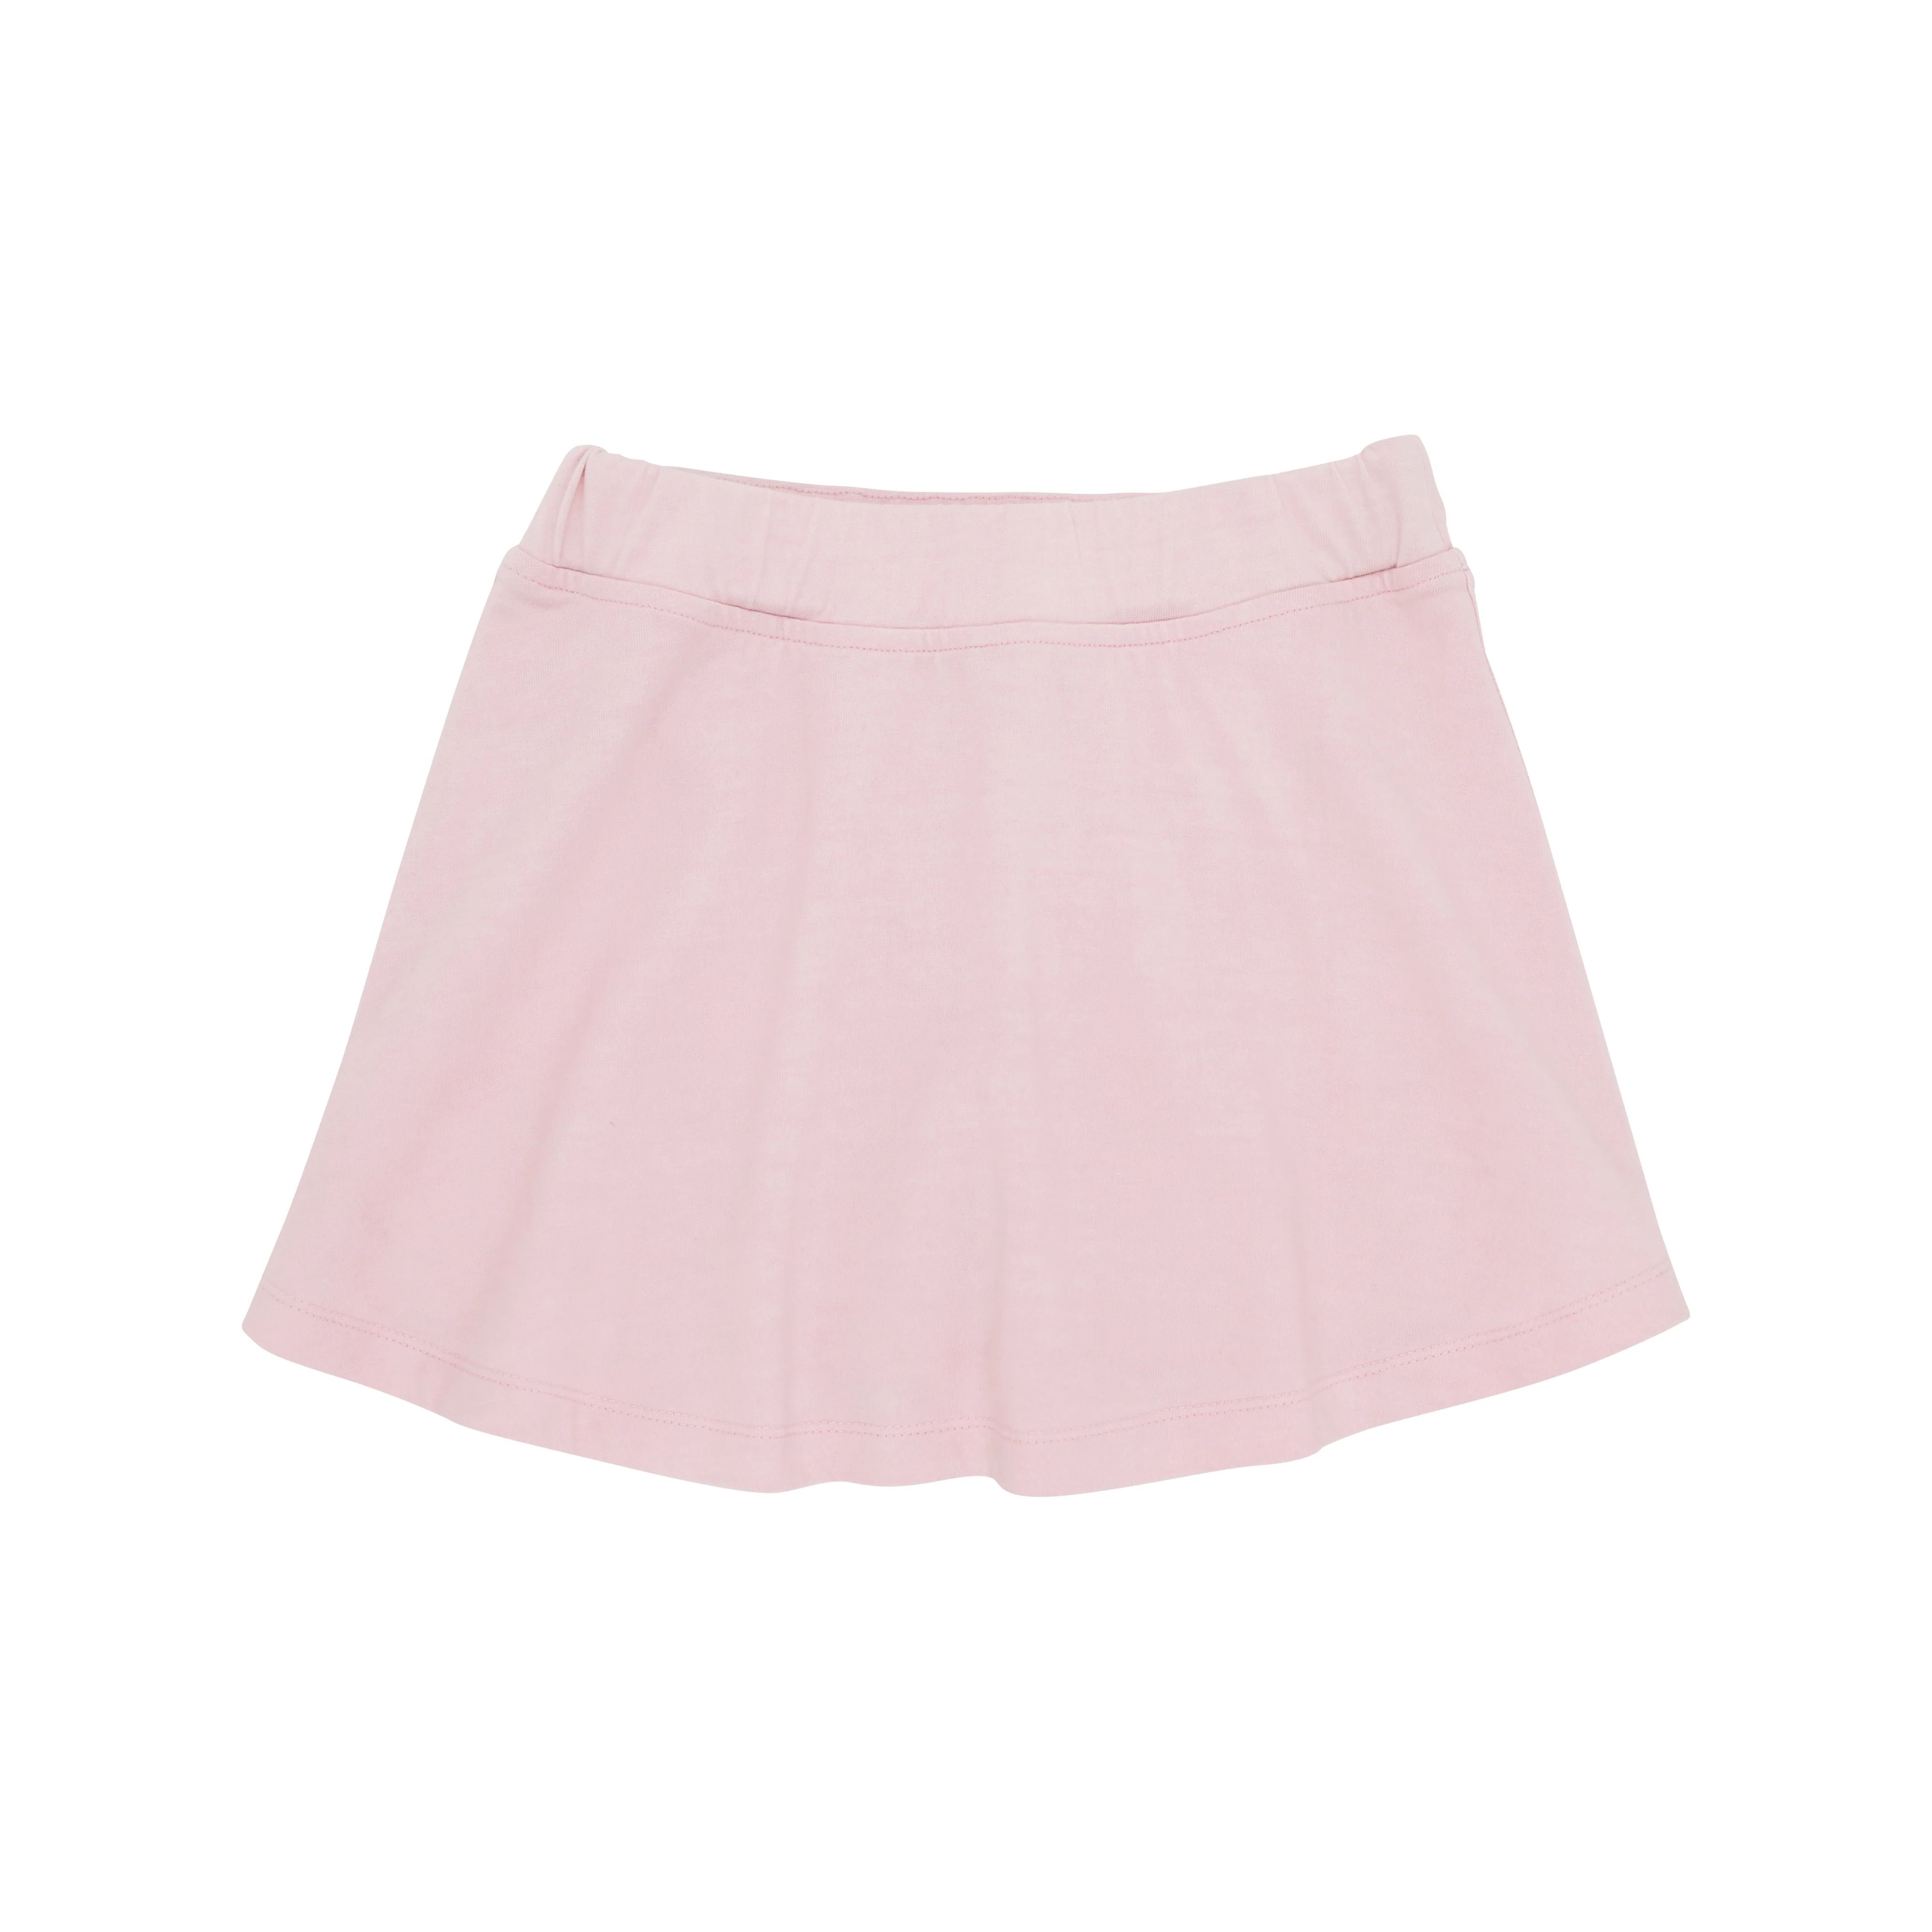 Searcy Skort - Palm Beach Pink with Beale Street Blue Stork | The Beaufort Bonnet Company